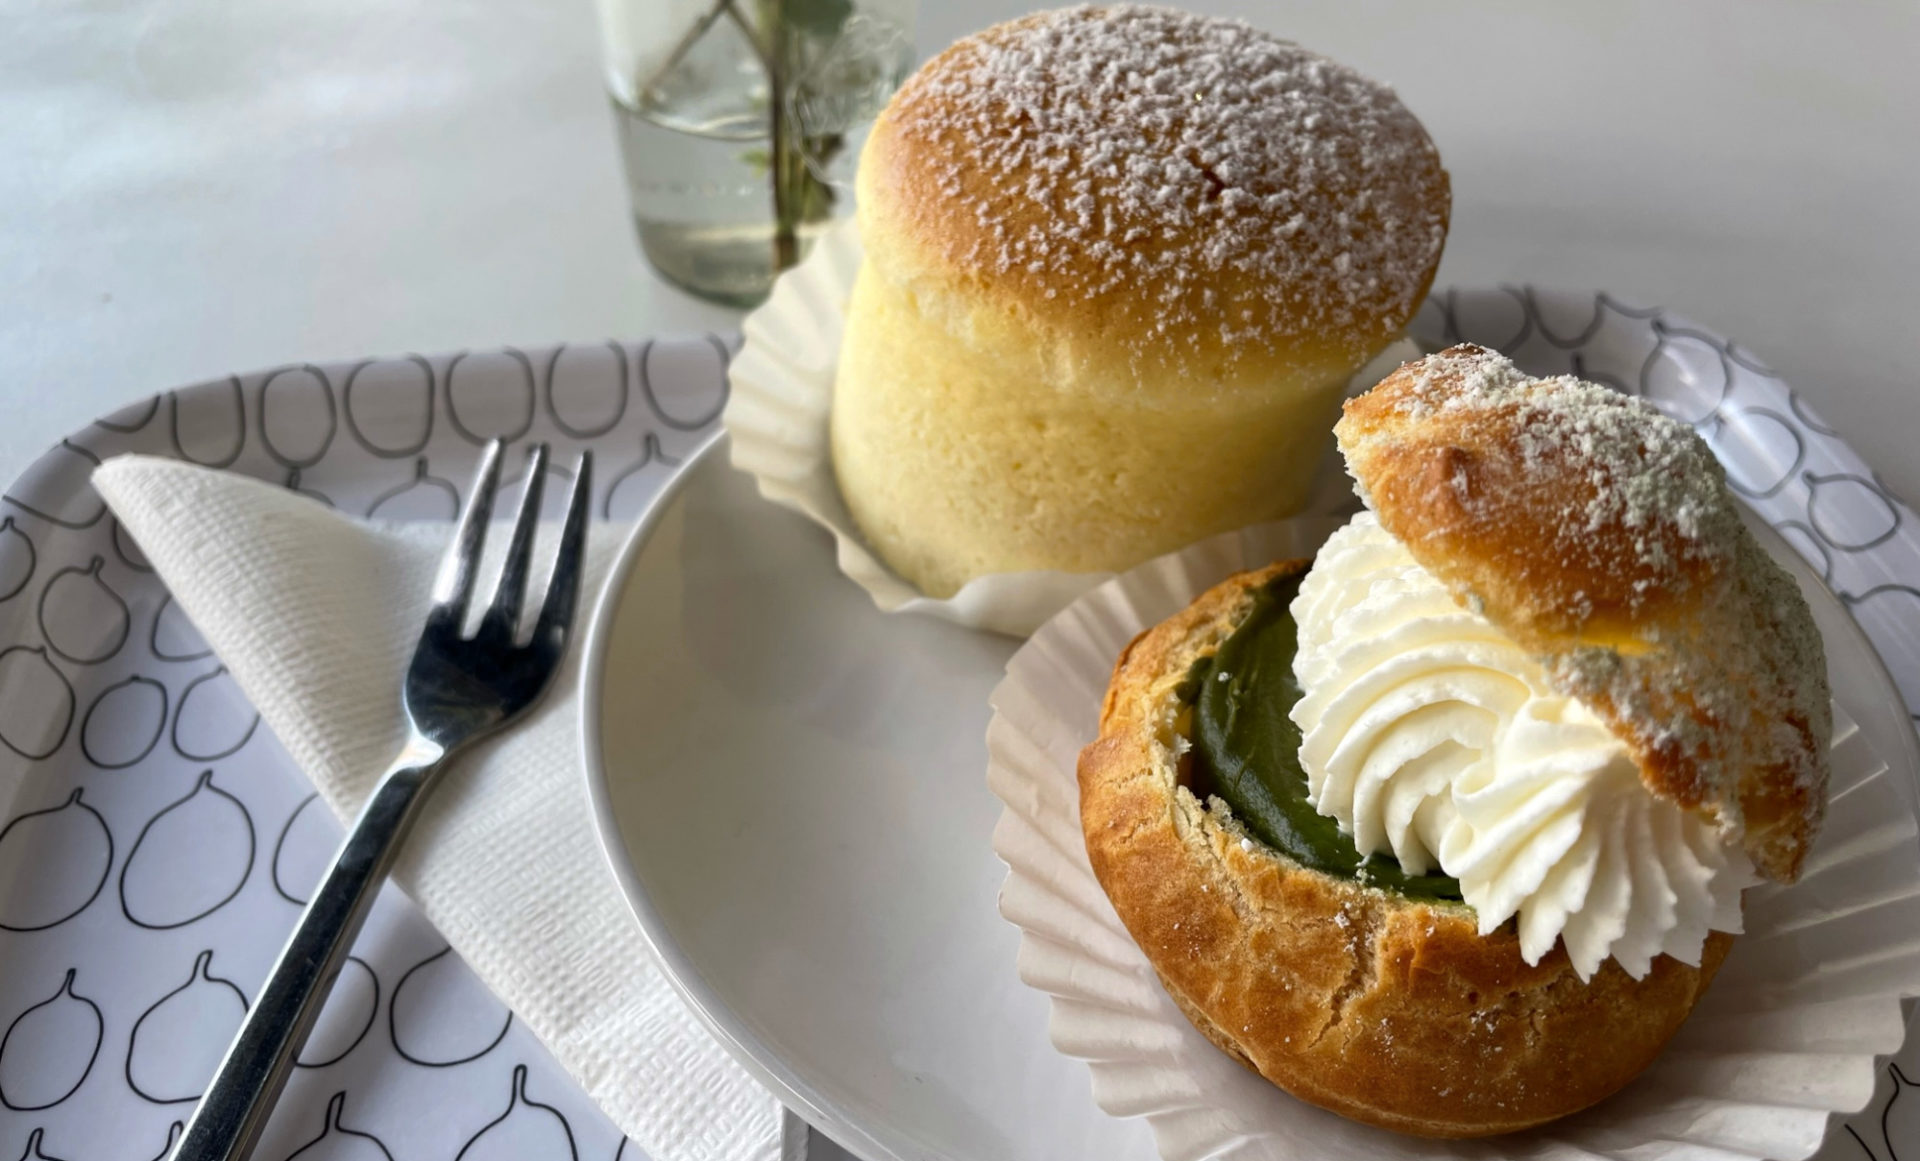 On a plate sits a Japanese cheesecake, a pale yellow dome-cylinder. It is dusted with powdered sugar. Next to that is a matcha shu cream puff: a round crust topped with green matcha cream, dolloped with whipped cream, and topped with the other have of the round crust. A fork is to the left of the sweets.